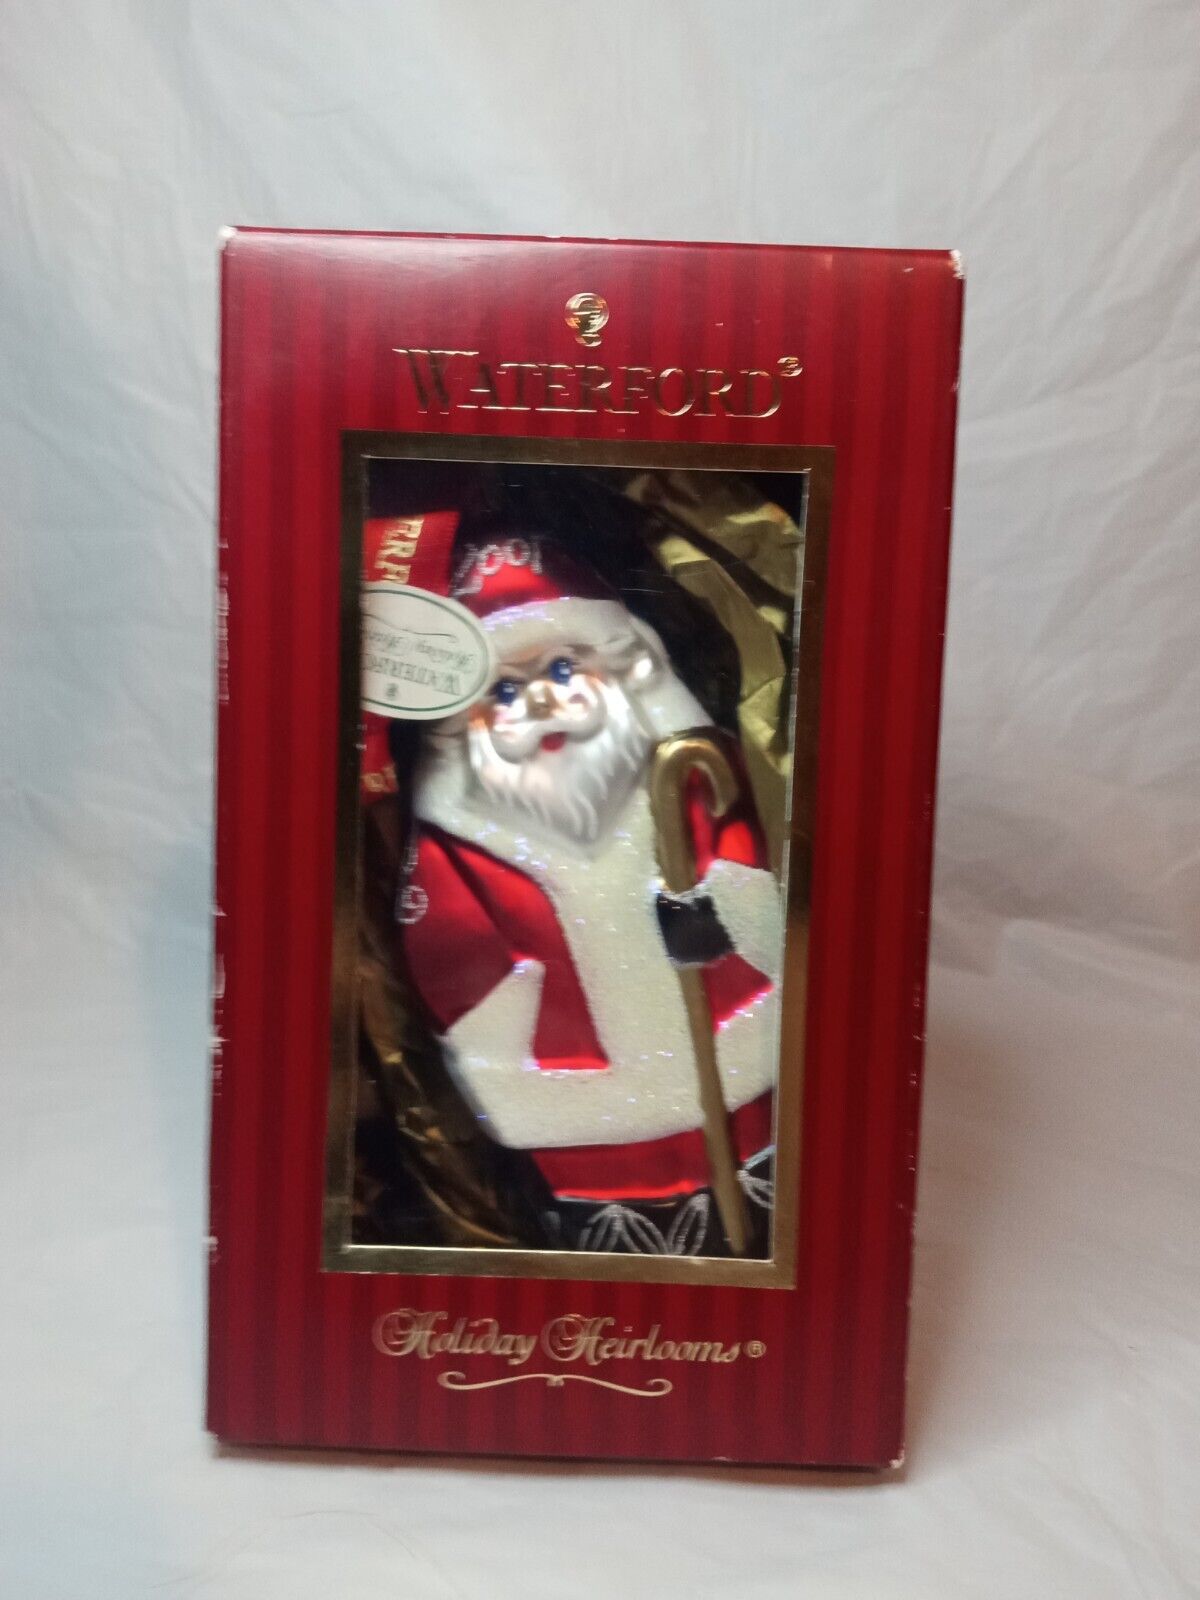 Waterford Holiday Heirlooms Glass Santa Exquisite Christmas Ornament. New